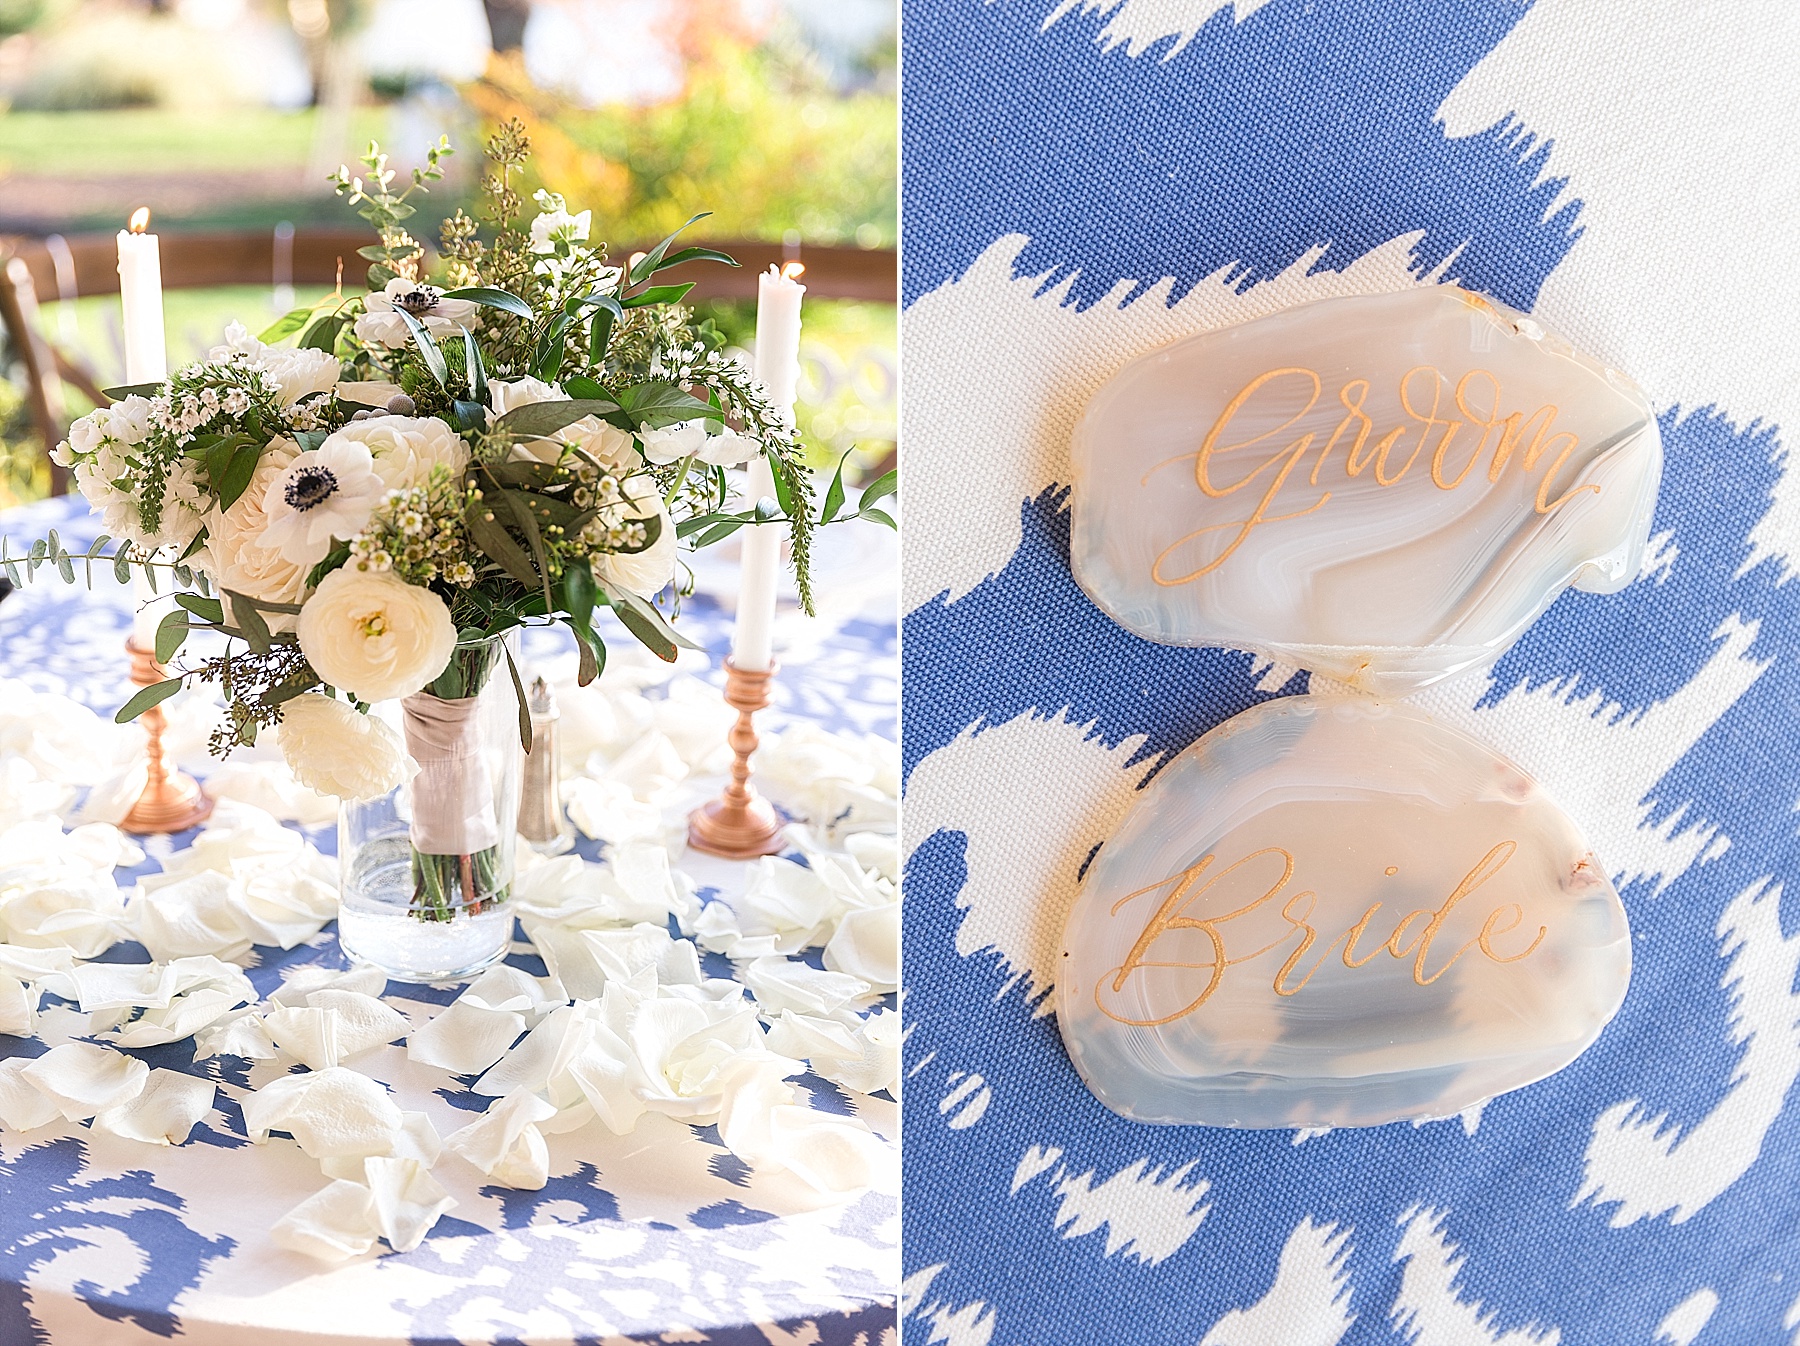 sweetheart table details photographed by Alexandra Mandato Photography